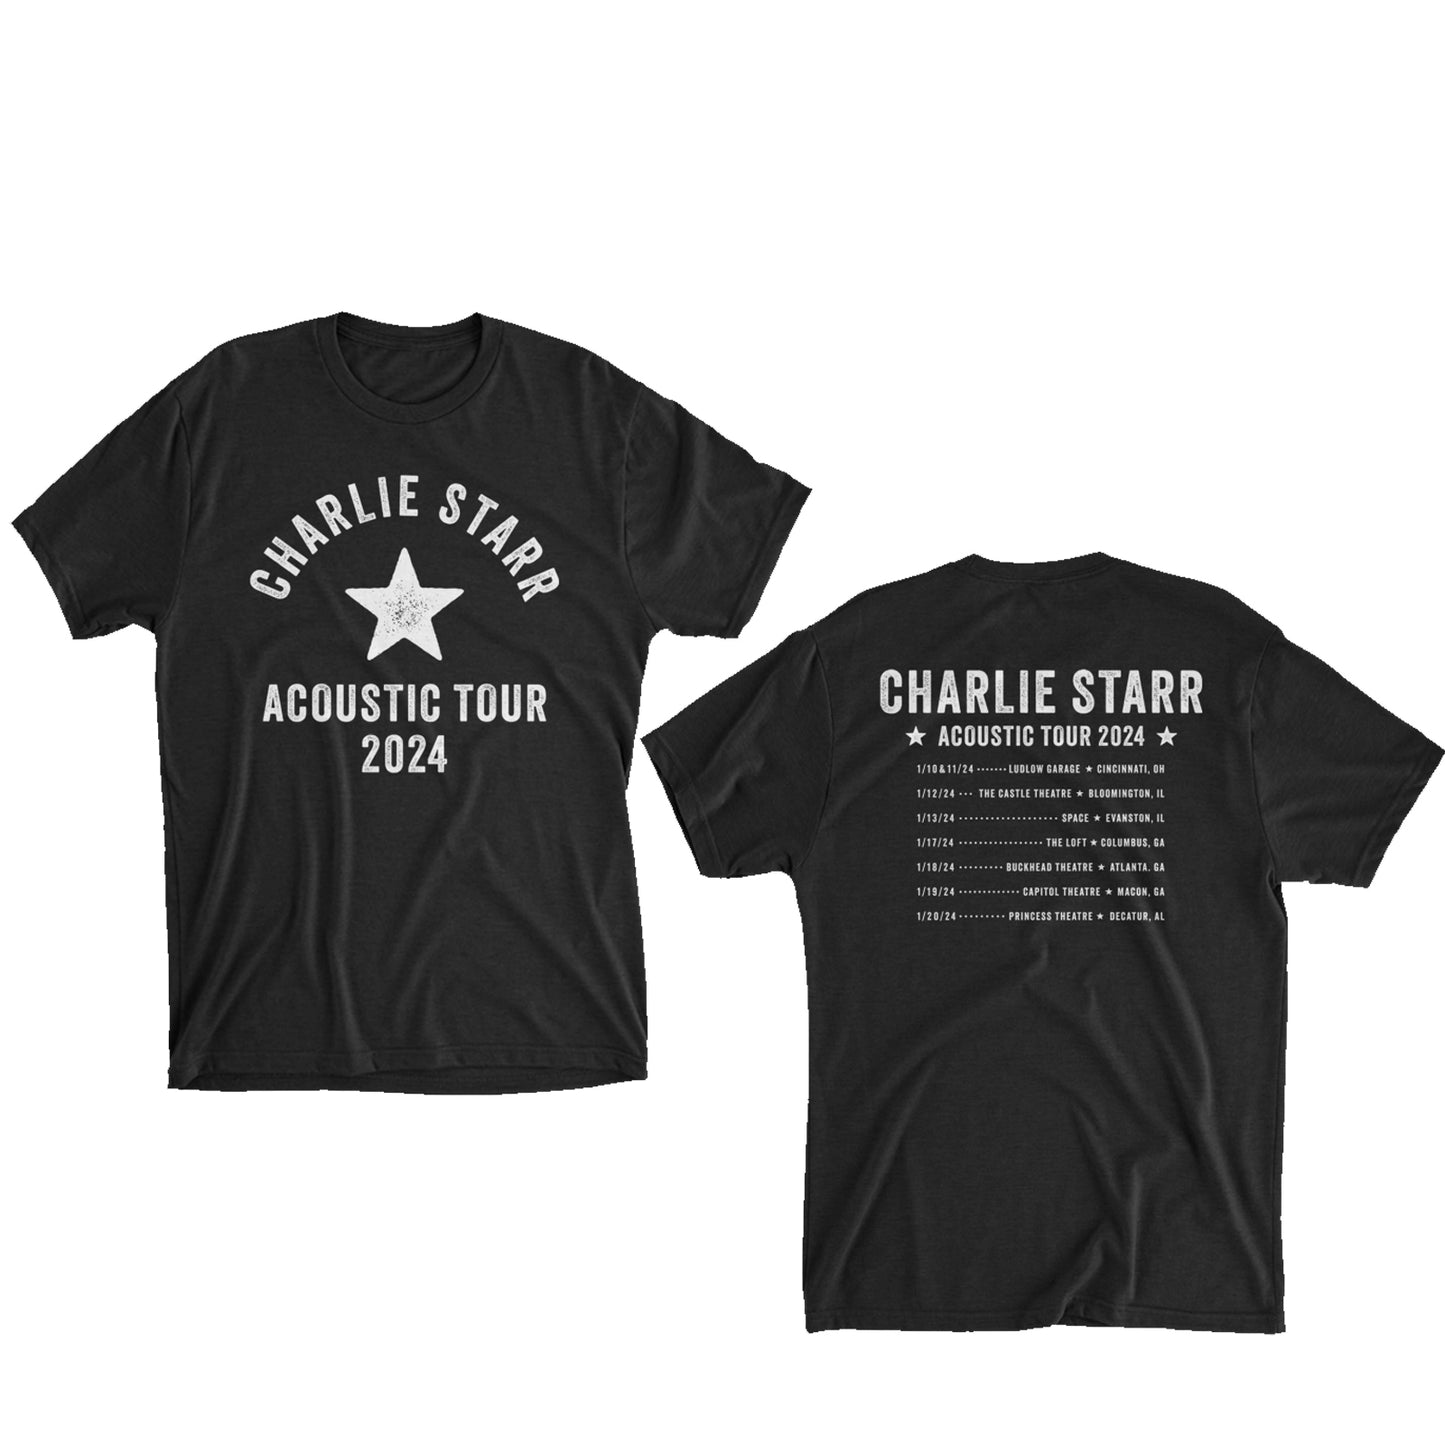 Charlie Starr Acoustic Tour 2024 Tee